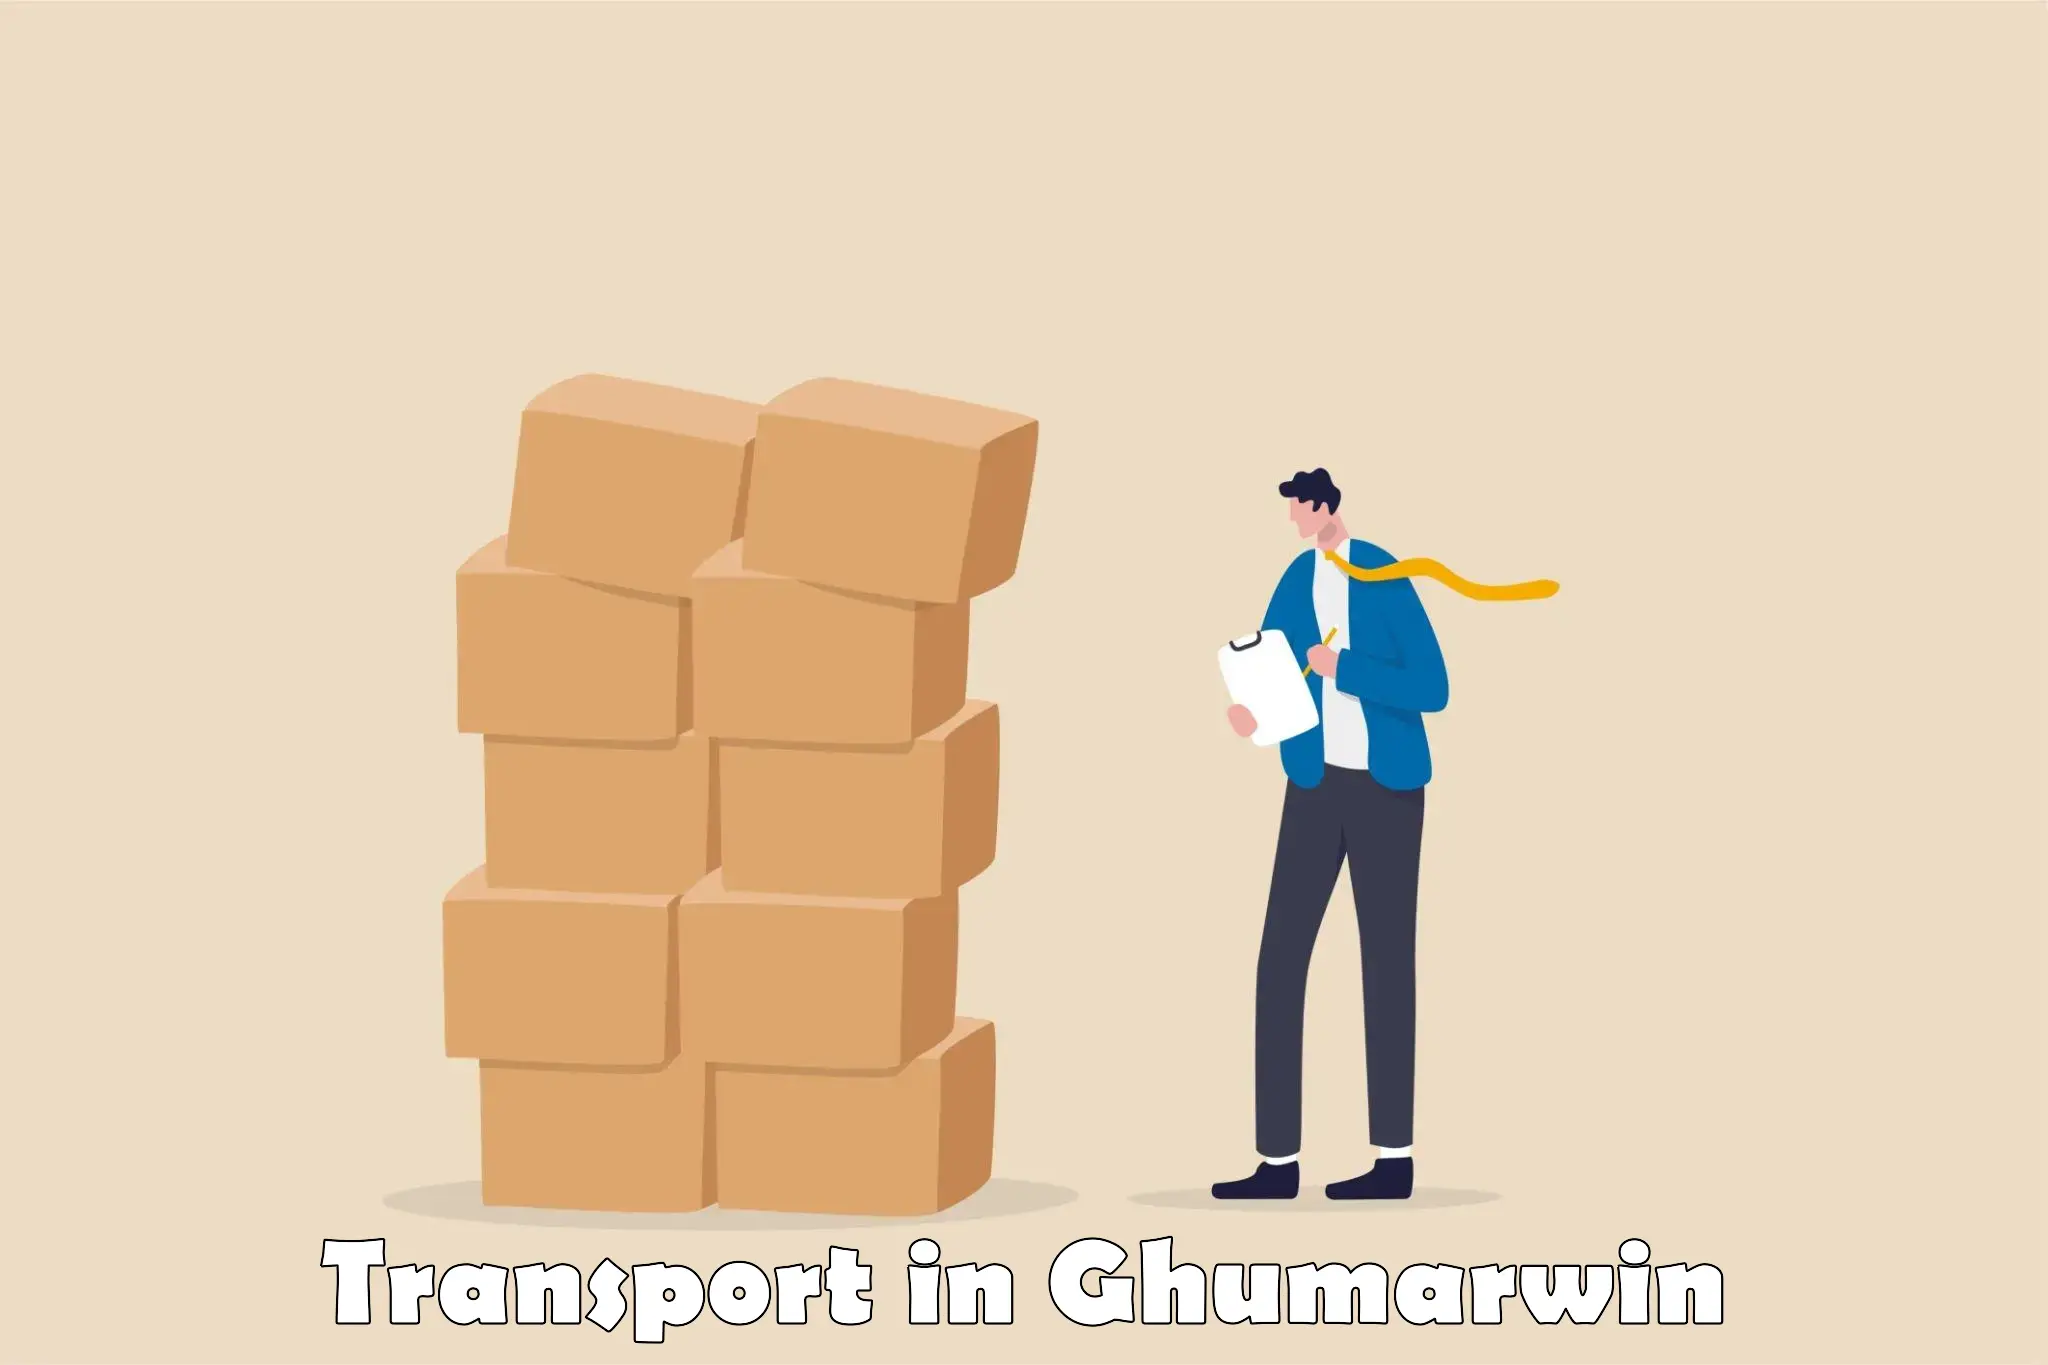 Transport in sharing in Ghumarwin